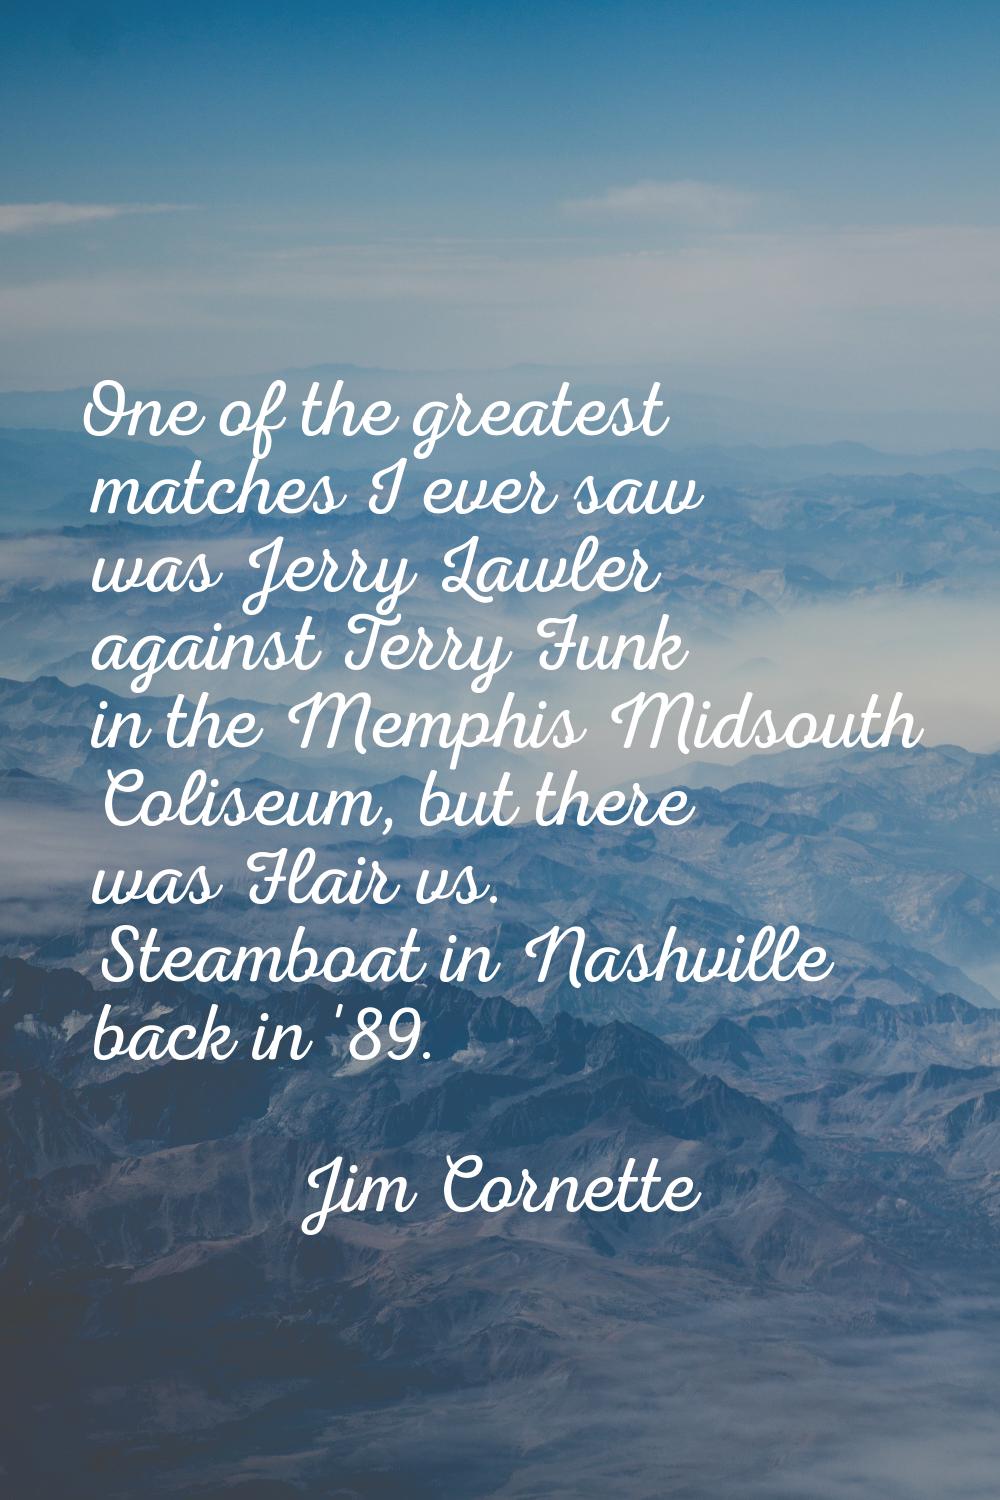 One of the greatest matches I ever saw was Jerry Lawler against Terry Funk in the Memphis Midsouth 